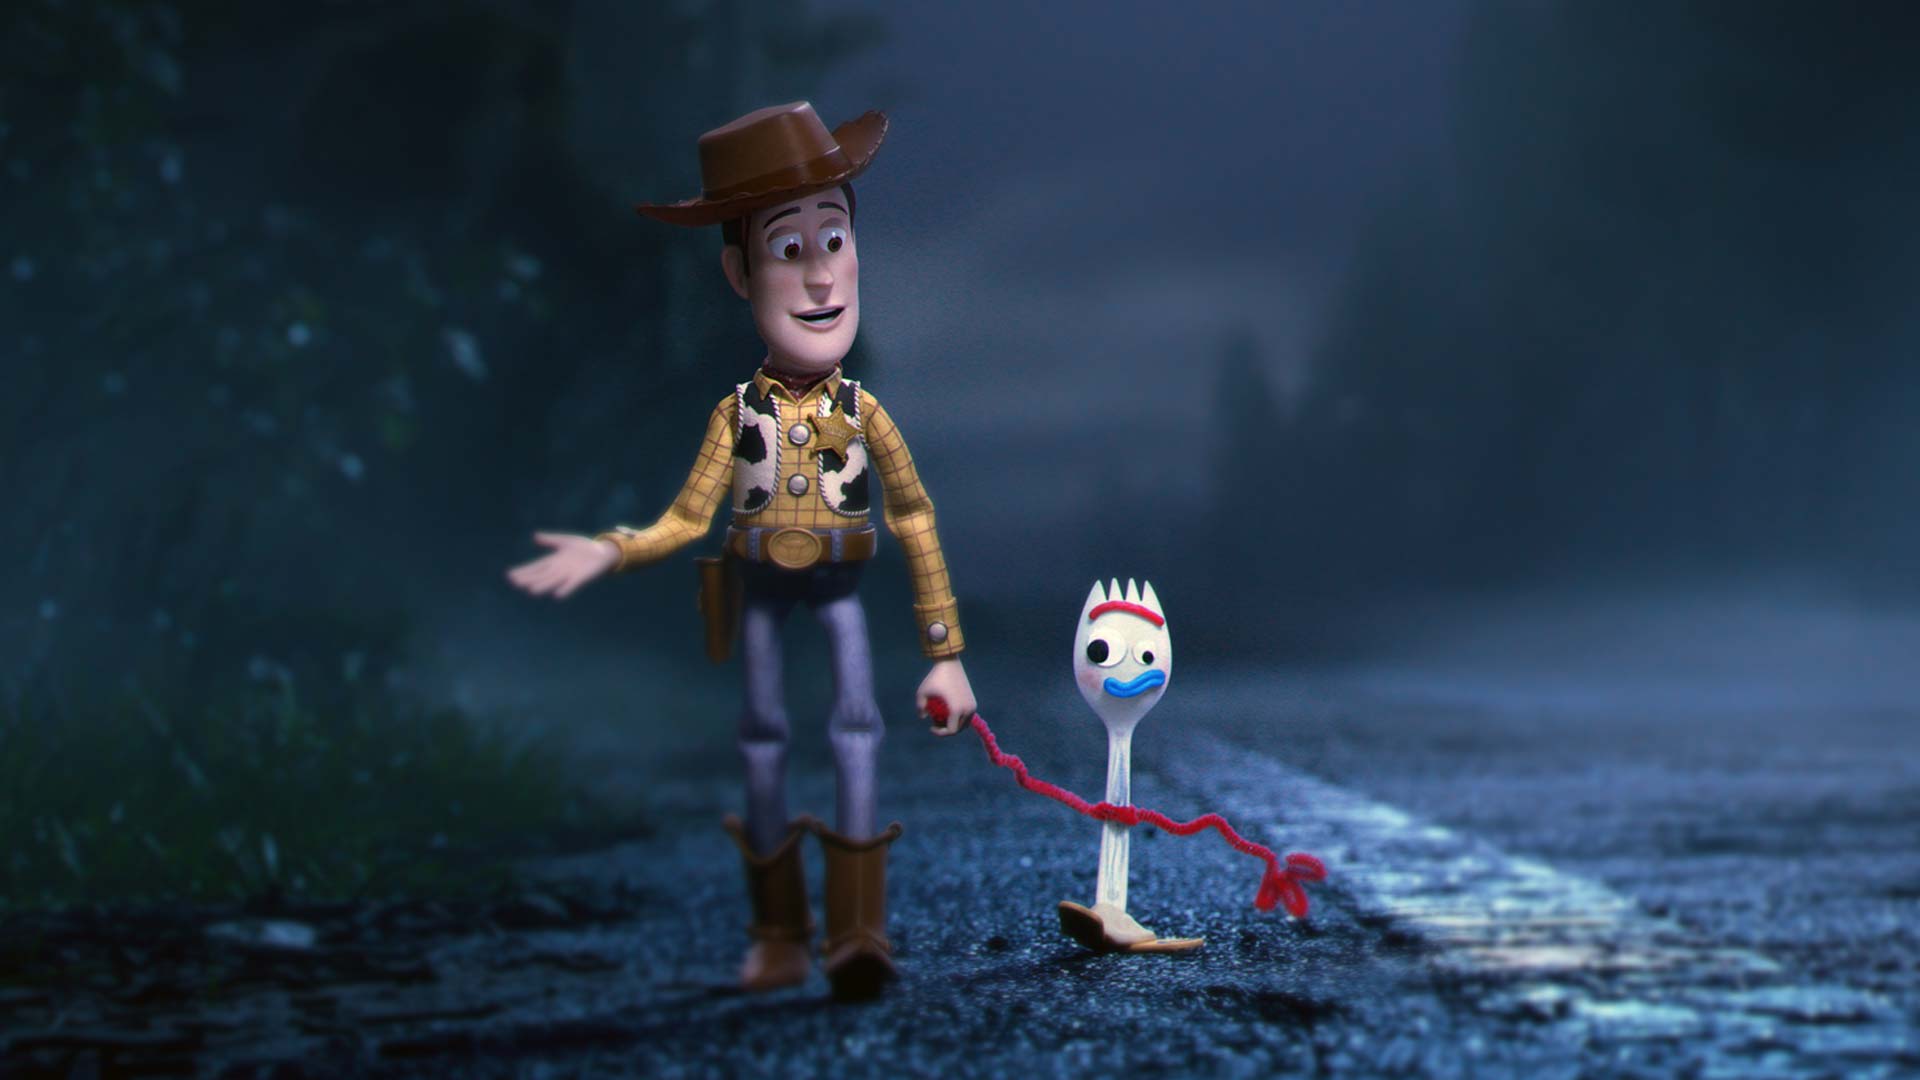 A scene from Toy Story 4